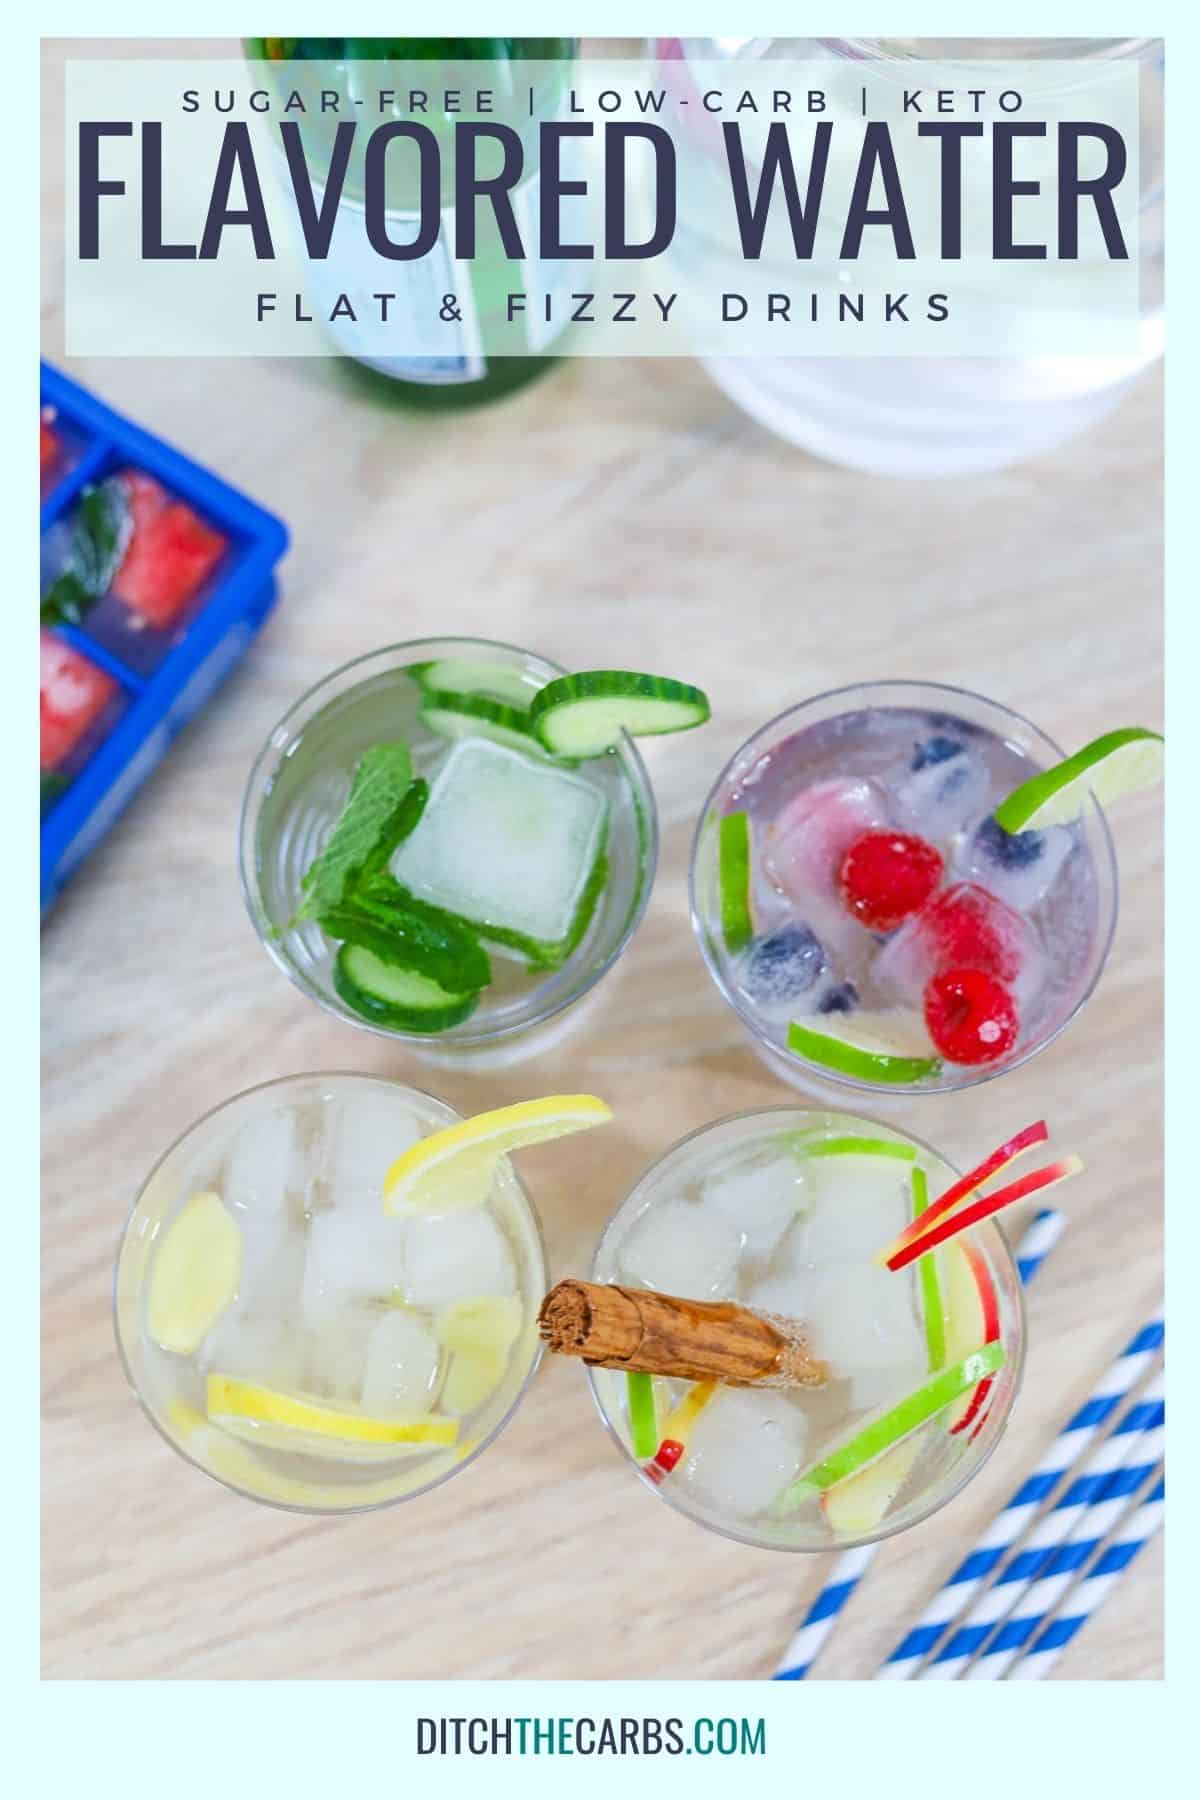 4 glasses with different flavoured water ideas in them